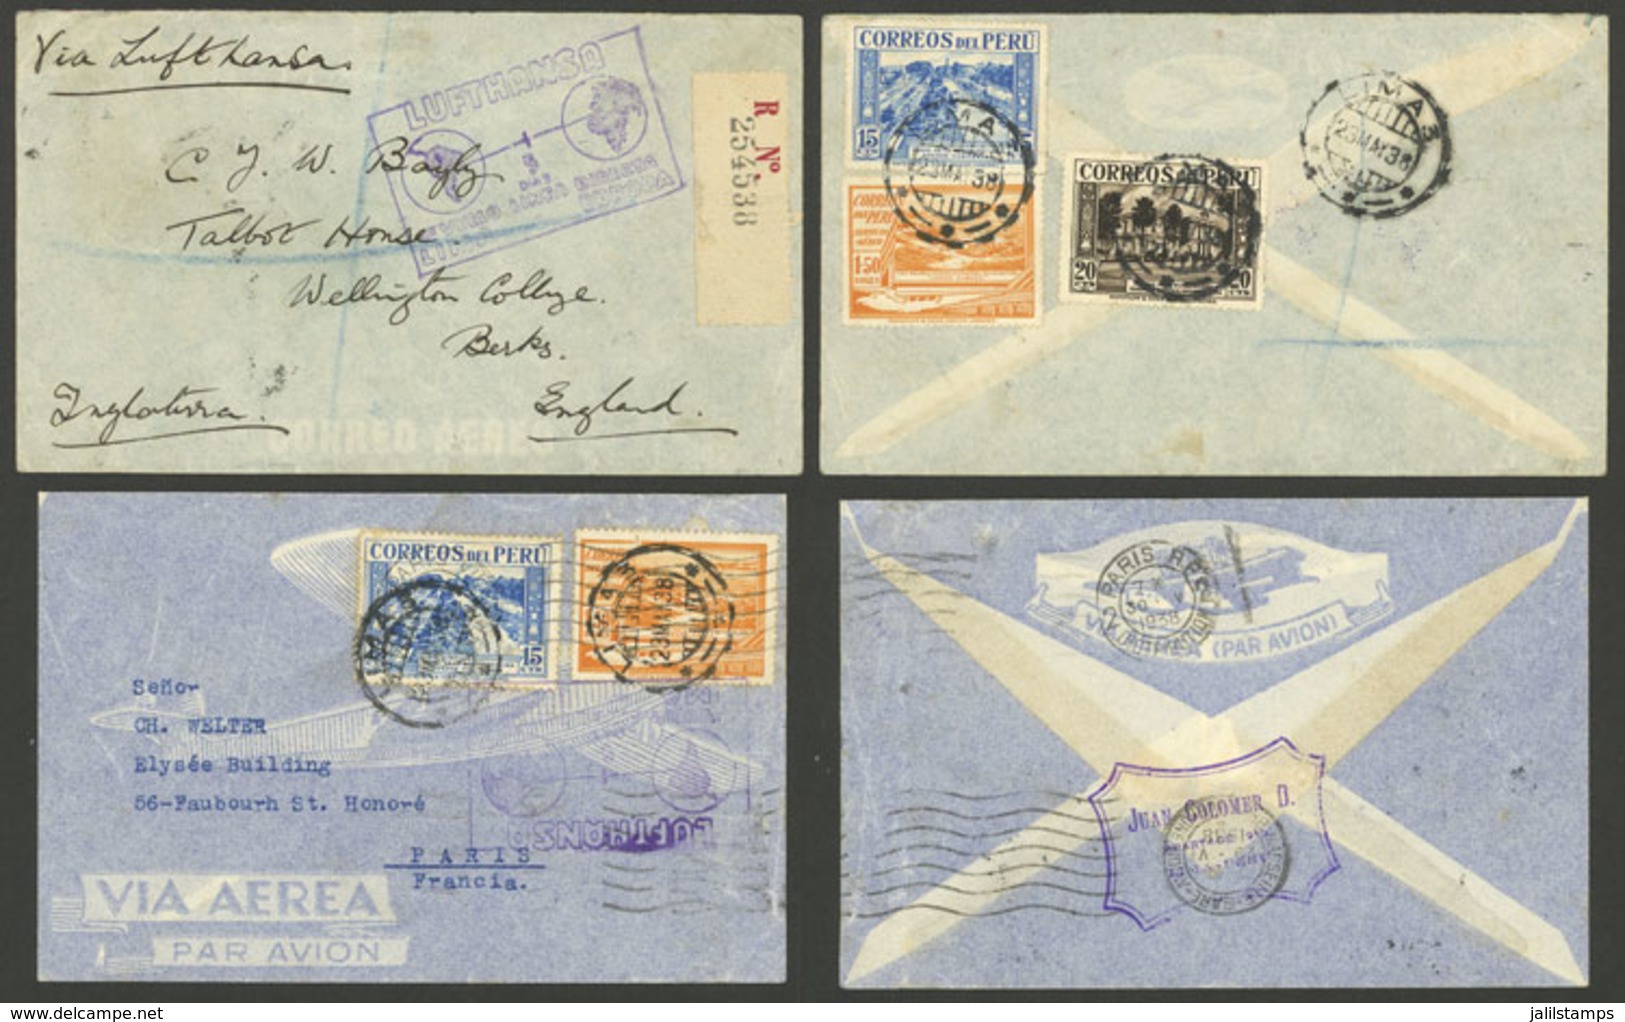 PERU: 23/MAY/1938 First Flight Lima - Europe By Lufthansa, 2 Covers Sent To England And France, The Former Registered, B - Peru